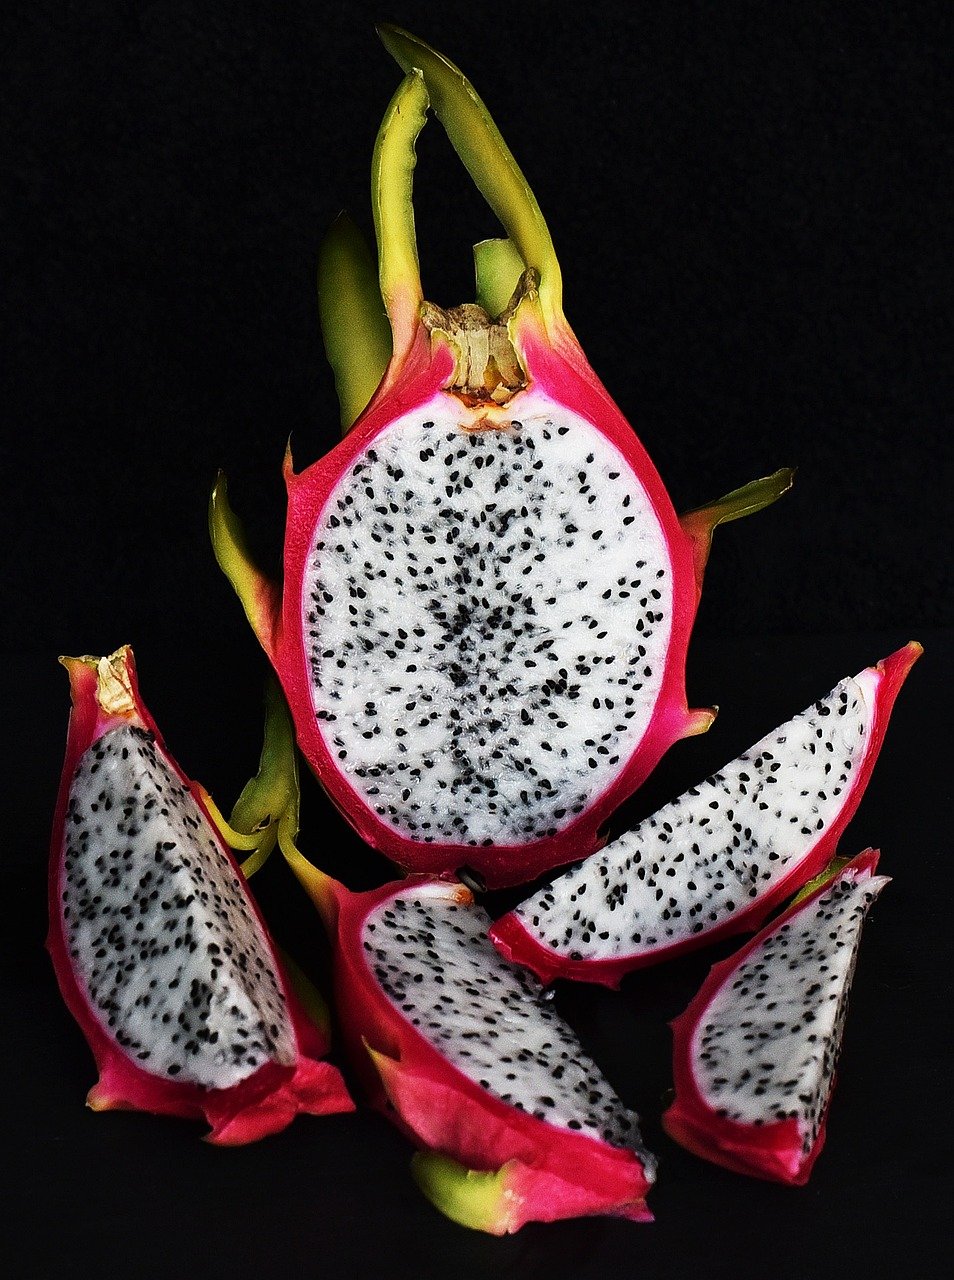 How to Properly Cut a Dragonfruit